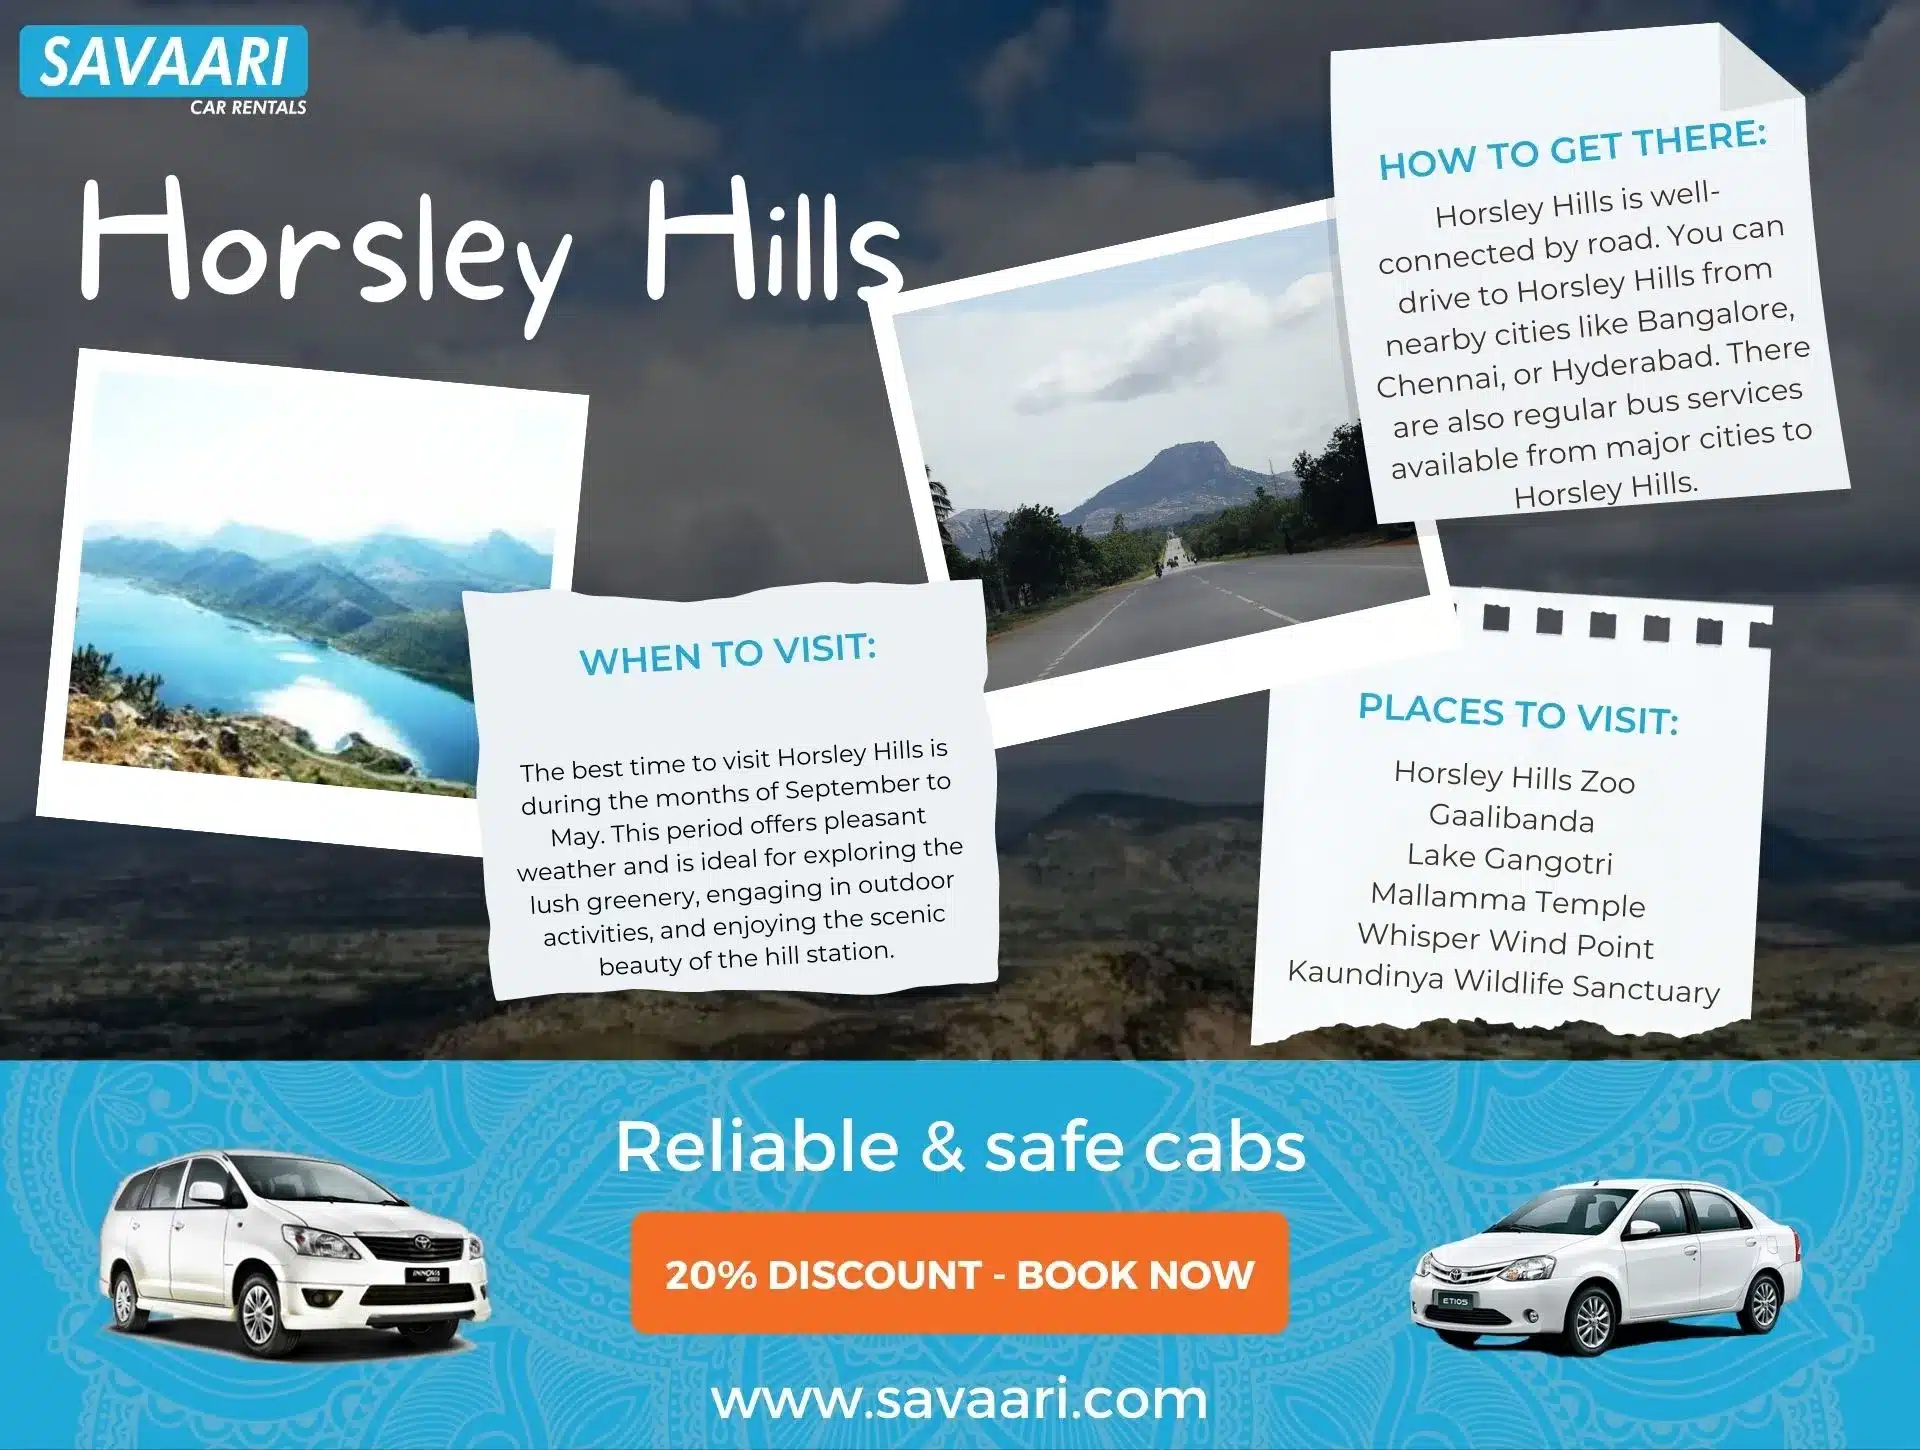 Things to do in Horsley Hills